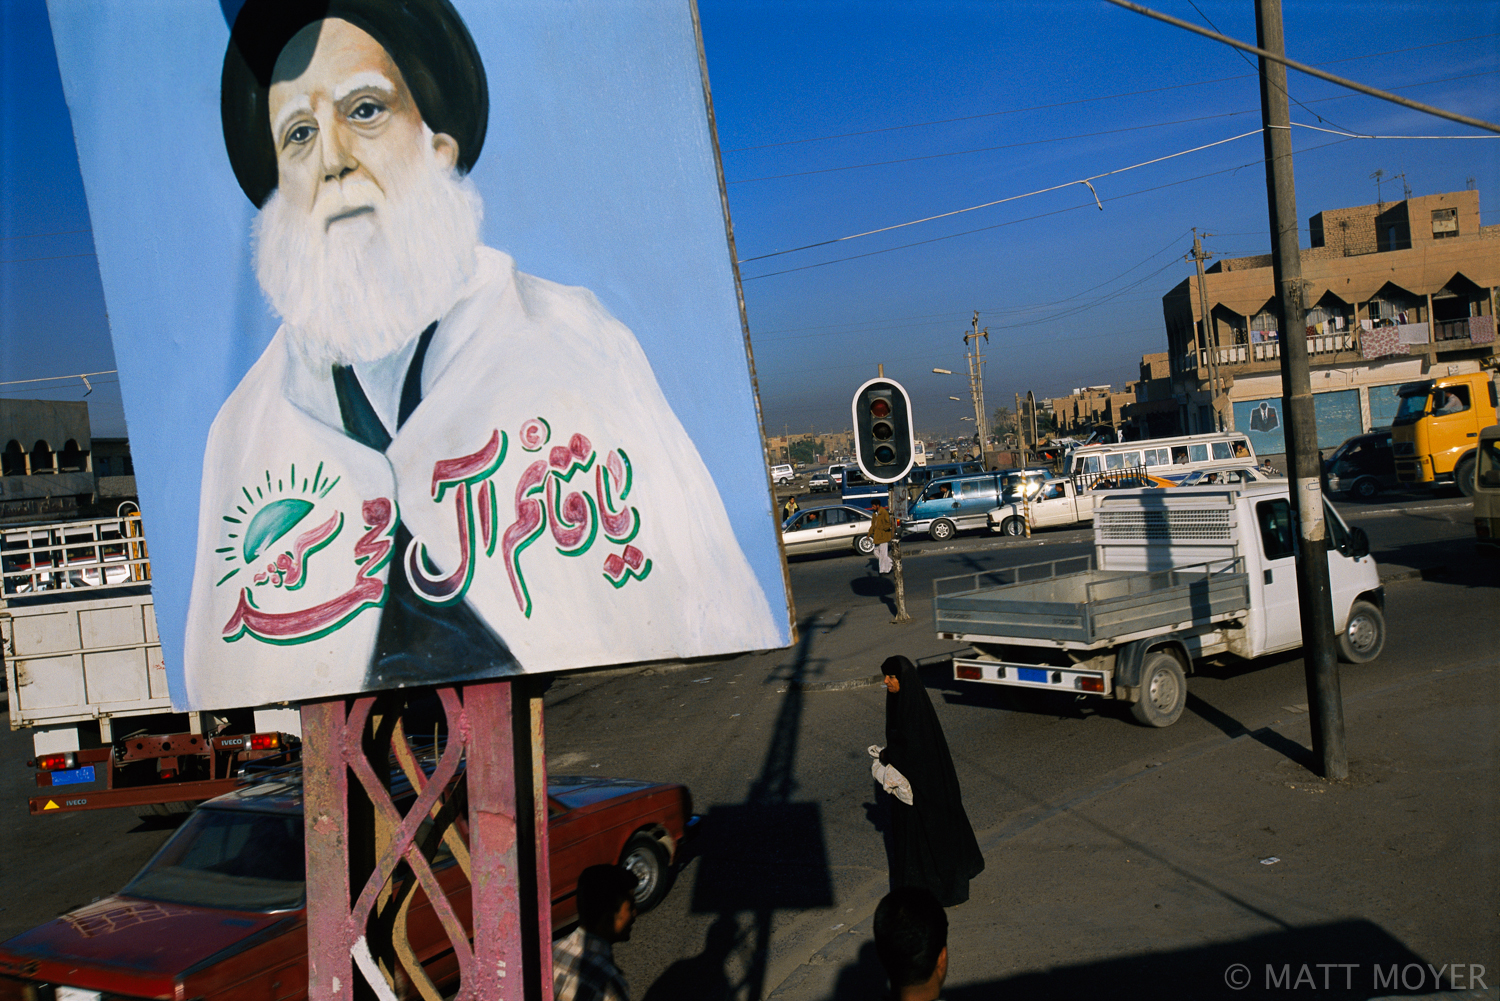  A painting of Mohammad Sadik el Sadr, the revered Shiite cleric, hangs over an intersection in Sadr City, Iraq. Sadr City, named after the cleric who was killed by Saddam in the late 1990s, used to be called Saddam City. With the fall of Saddam Huss